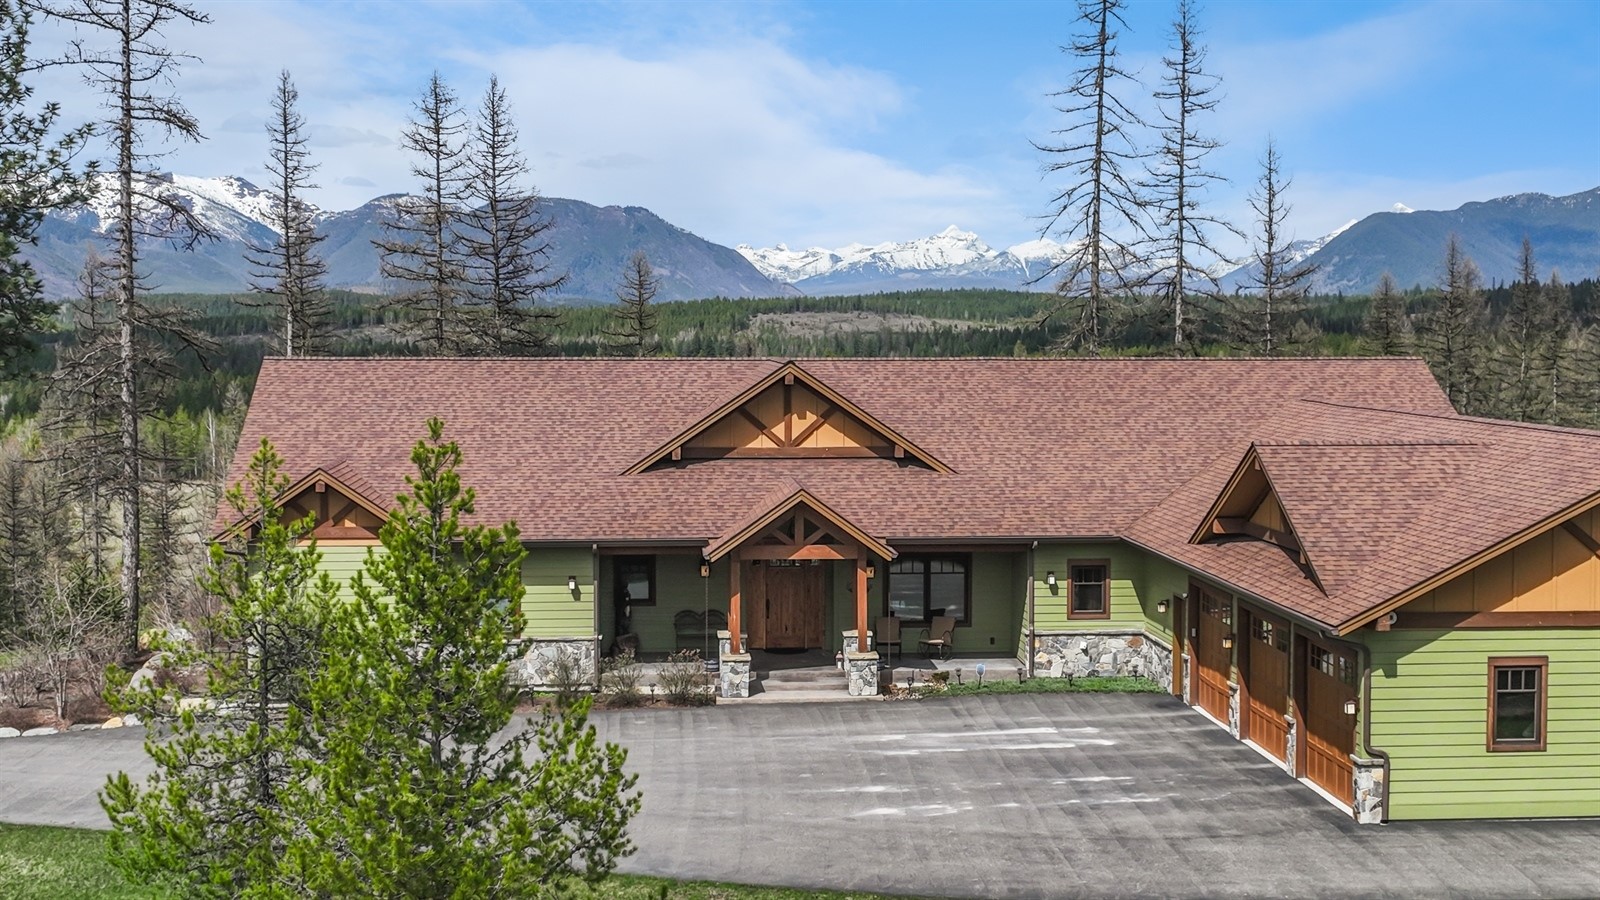 The majesty of Glacier National Park is on full display from this private estate on 20 acres, and the design of the well-appointed 4747 square foot single-level home takes full advantage of those views. Enjoy the mountainous panorama from the large windows inside, or get one step closer to nature from the covered back deck. The impressive interior boasts vaulted ceilings, an open floor plan, spacious gourmet kitchen with large island and pantry, huge primary suite with 2 walk-in closets, 2 spacious guest bedrooms with a jack & jill bathroom, 2 half baths, and a bonus wing that could be used for recreation, hobbies, or customized into a guest apartment. The home has an attached triple garage, equipment garage & workshop, and a detached triple-bay garage. This is the magnificent Montana living you've been waiting for! Call Bill Leininger at 406-253-7333 or your real estate professional.